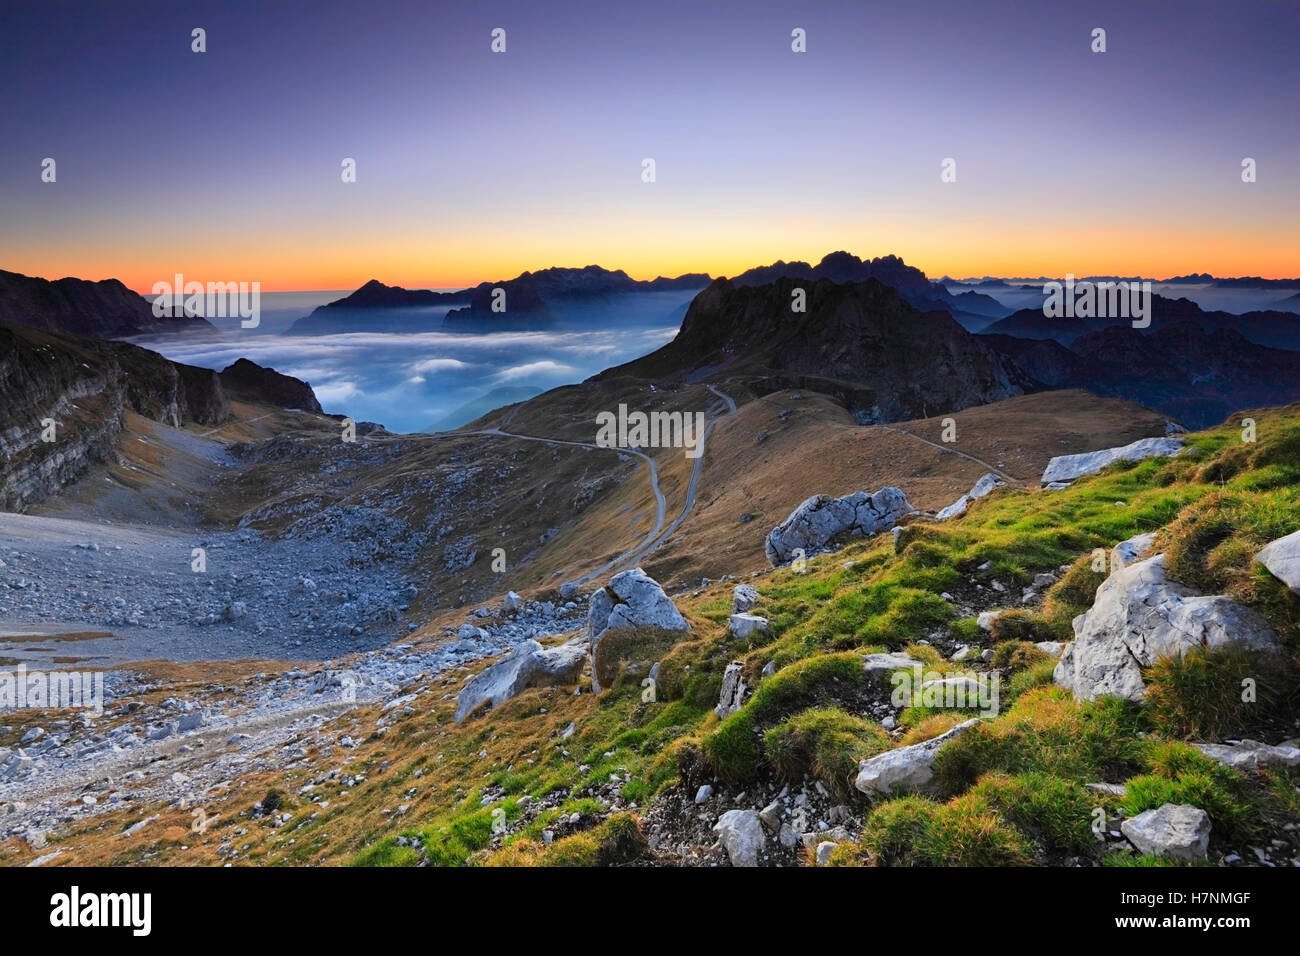 Mountains sunset landscape. Julian alps in Europe. Slovenia and Italy in a distance. Stock Photo